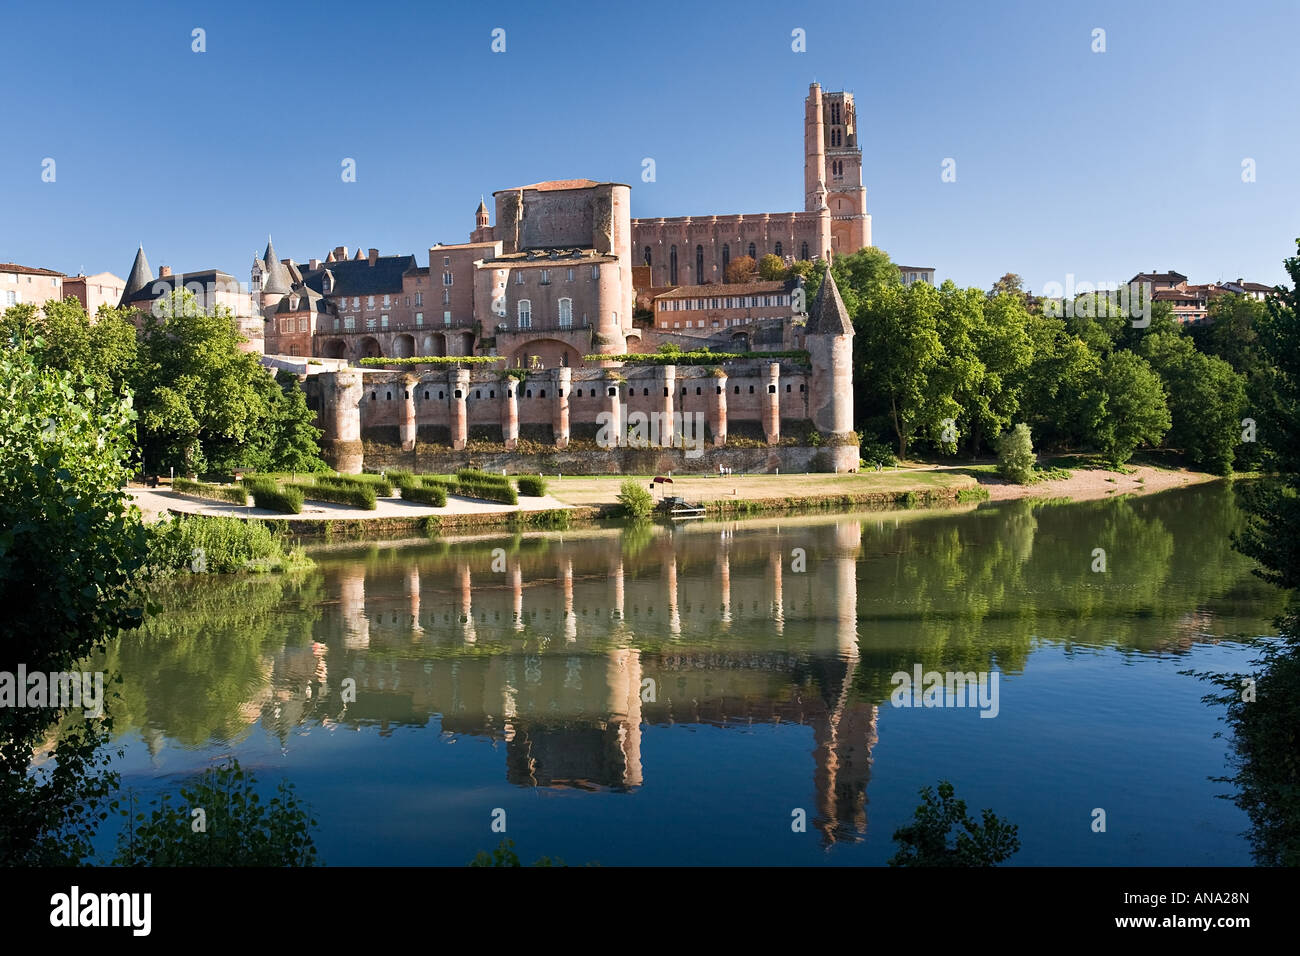 Palais de la Berbie and cathedral Sainte Cecile from the bank of the river Tarn, Albi, France. Stock Photo